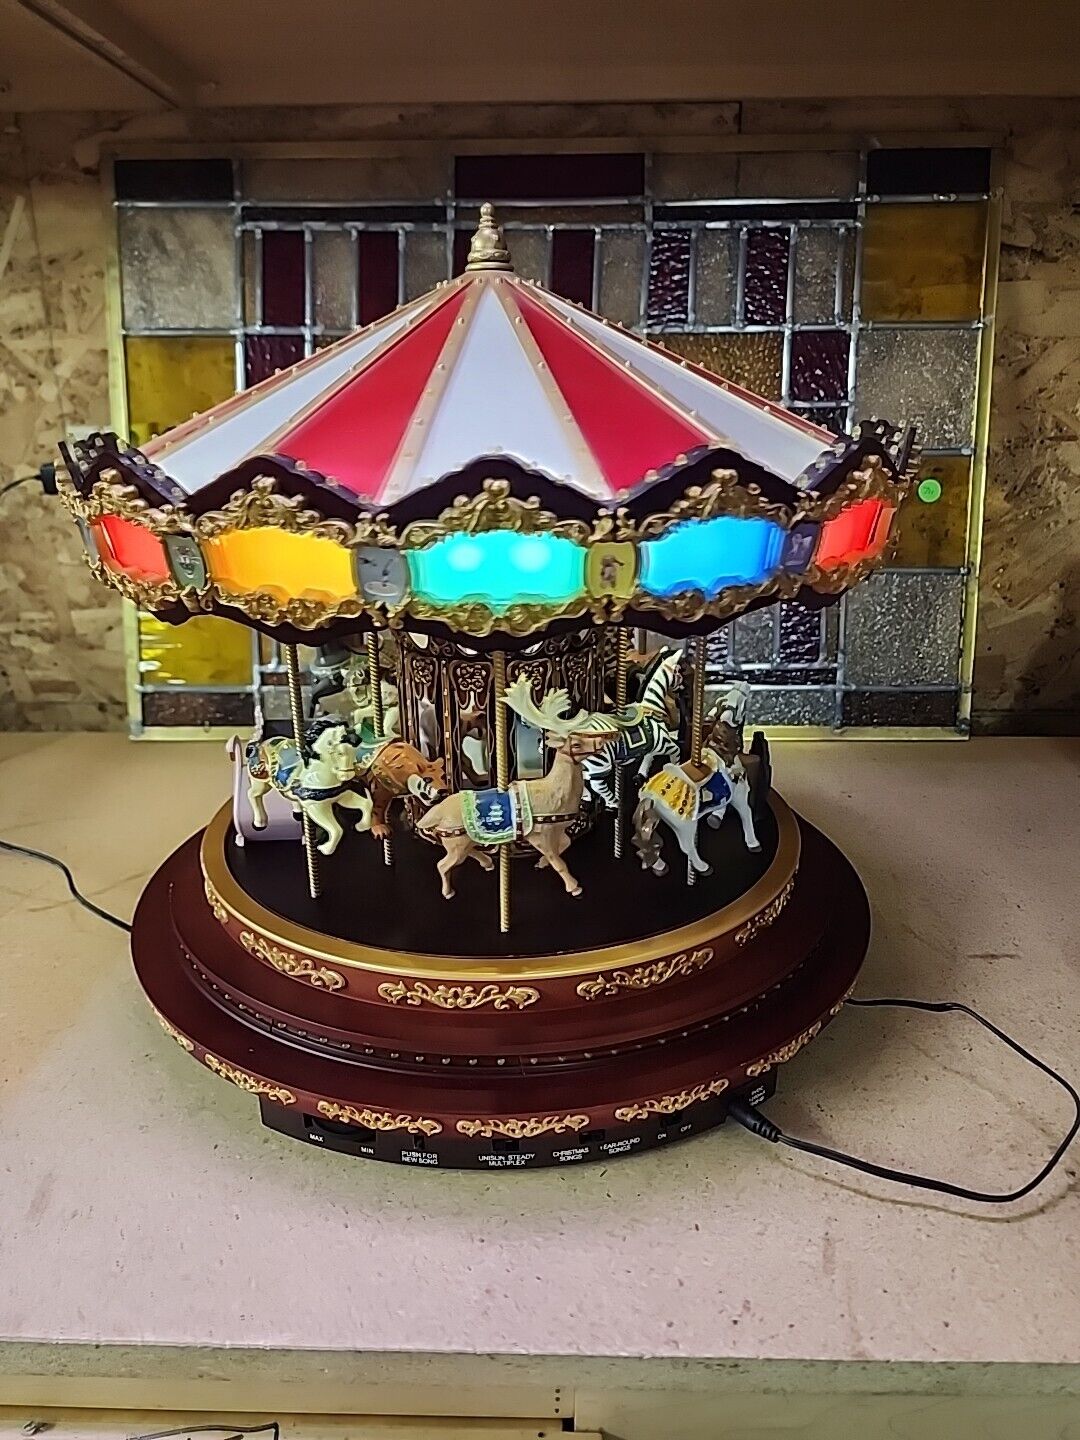 Mr Christmas Gold Label Diamond Jubilee Carousel - Great Working Condition Beaut